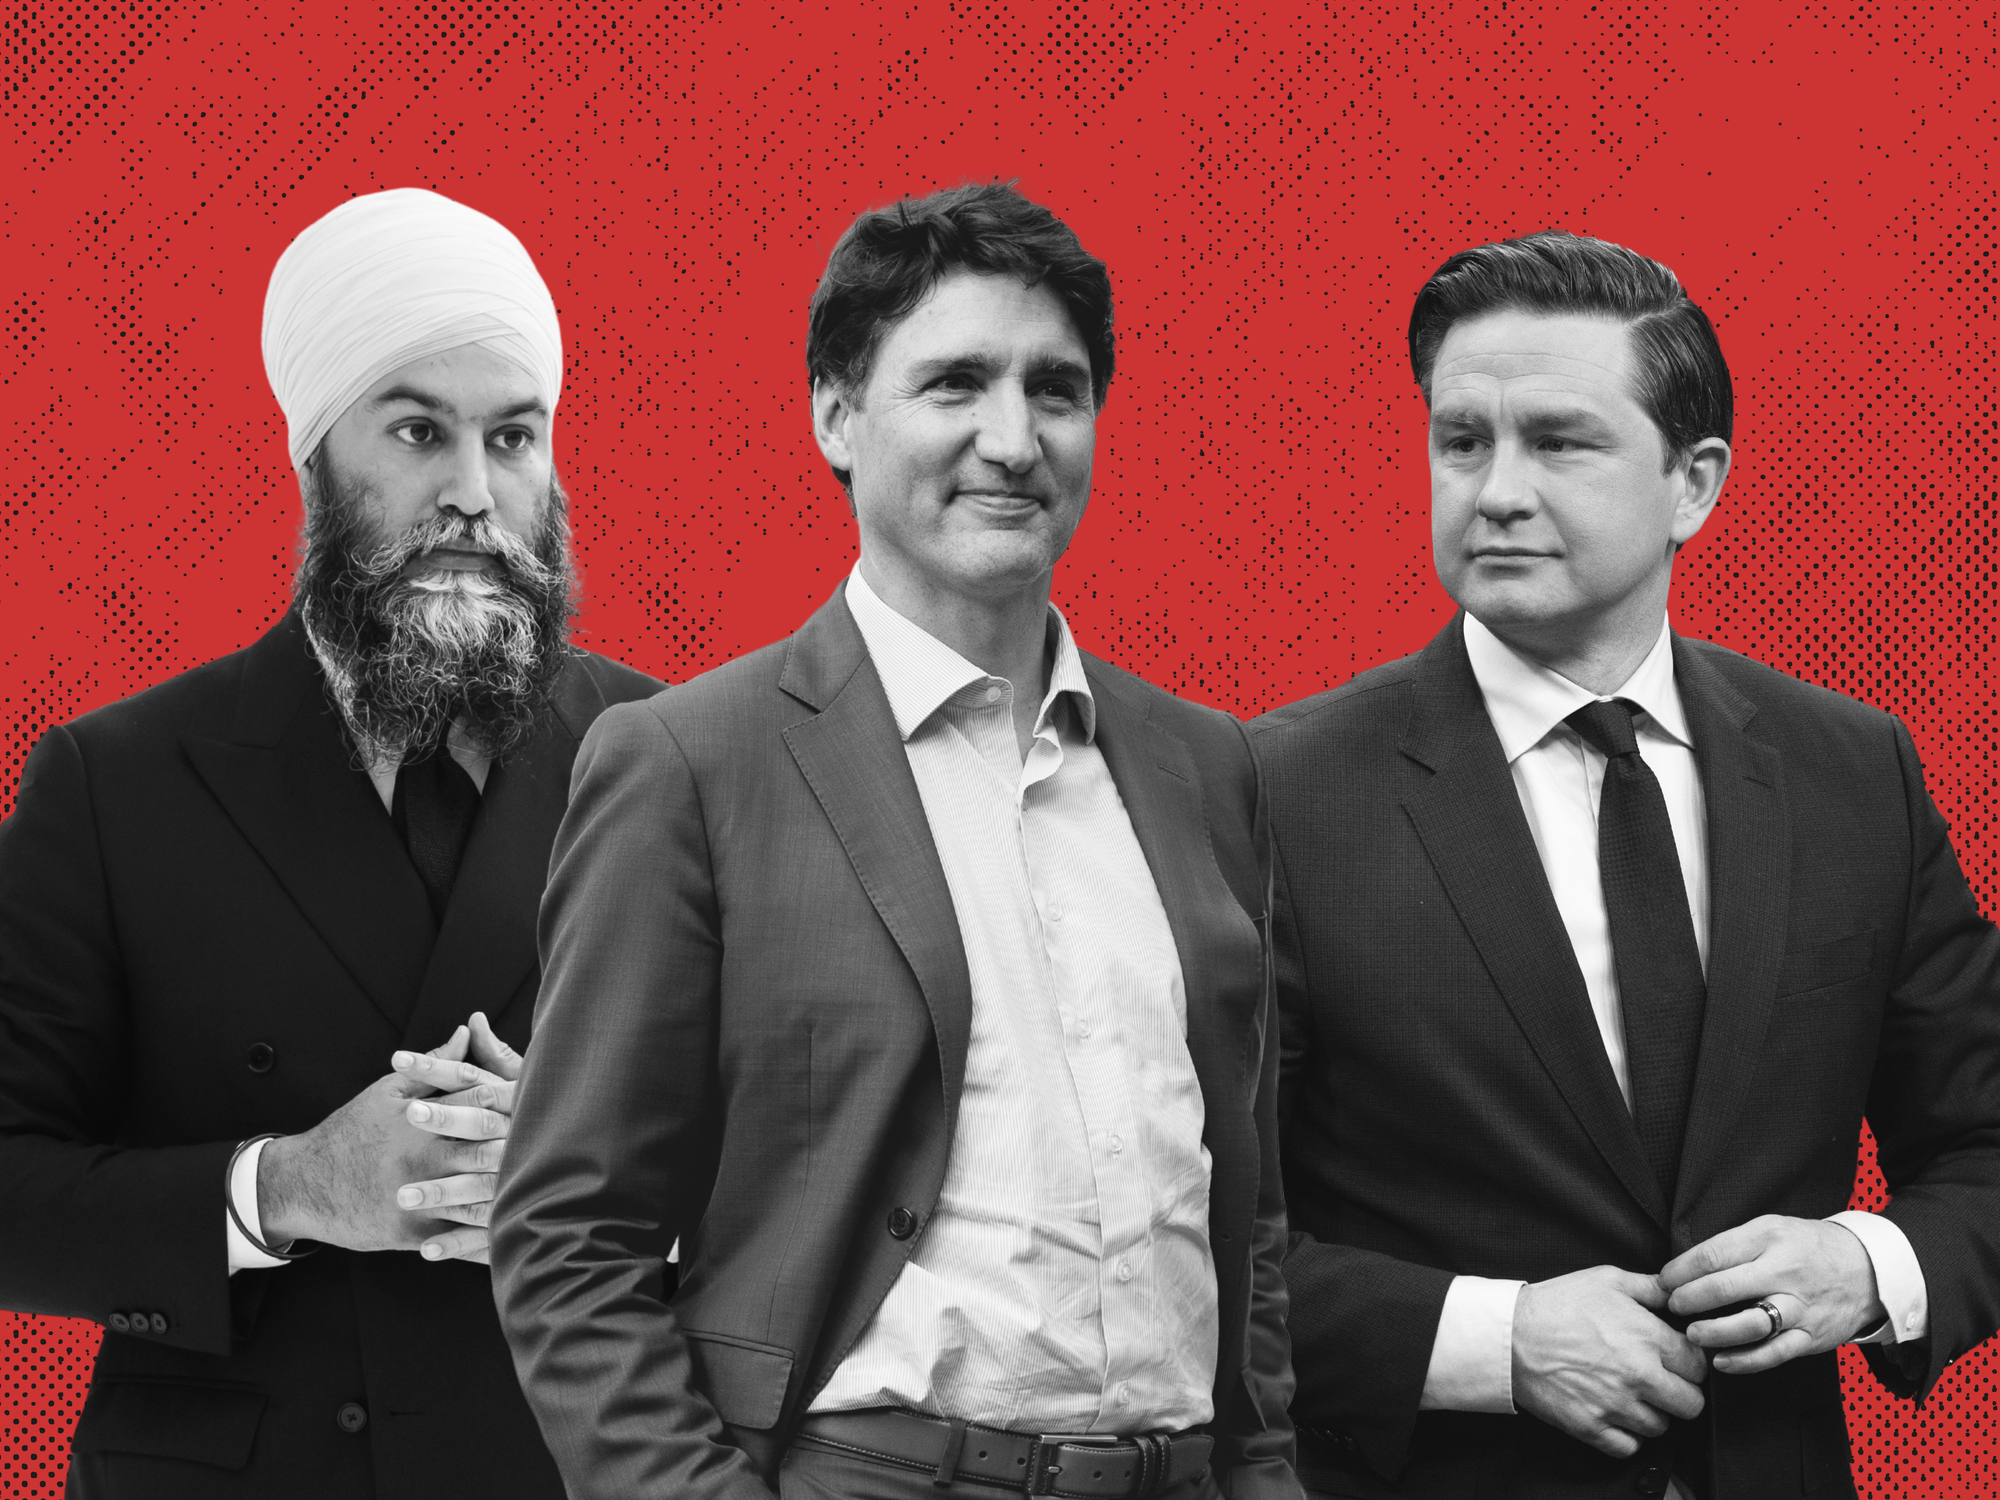 NDP leader Jagmeet Singh, Liberal leader Justin Trudeau, and Conservative leader Pierre Poilievre stand together.